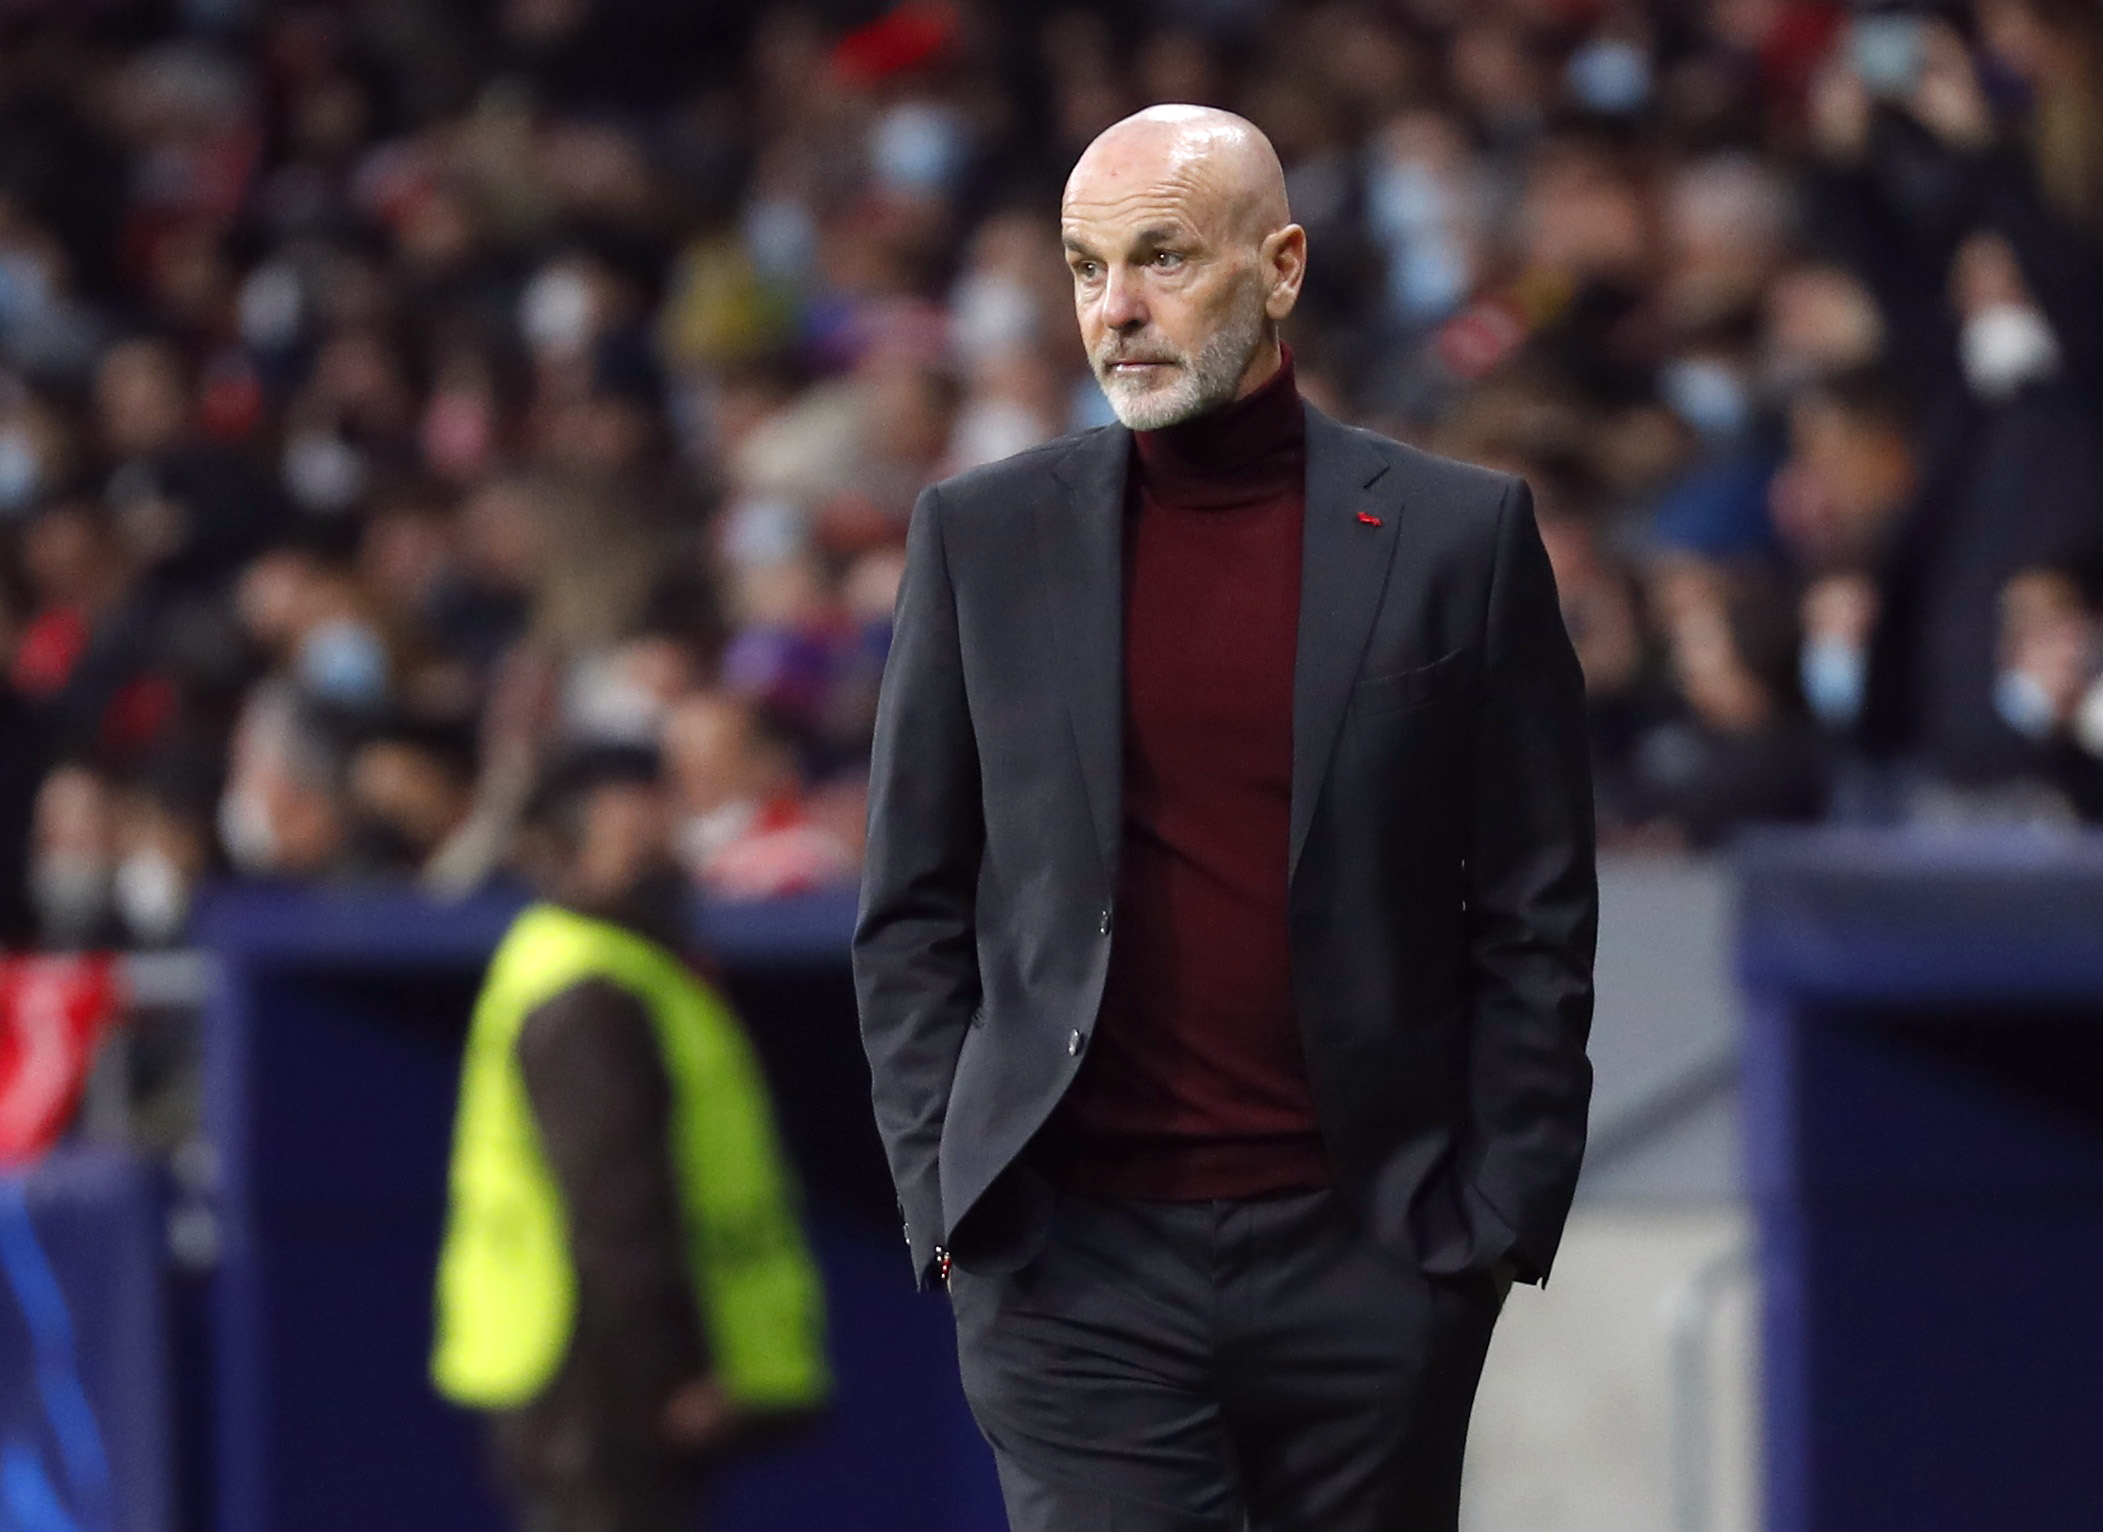 Milan coach Pioli aiming high after extending his contract | Reuters